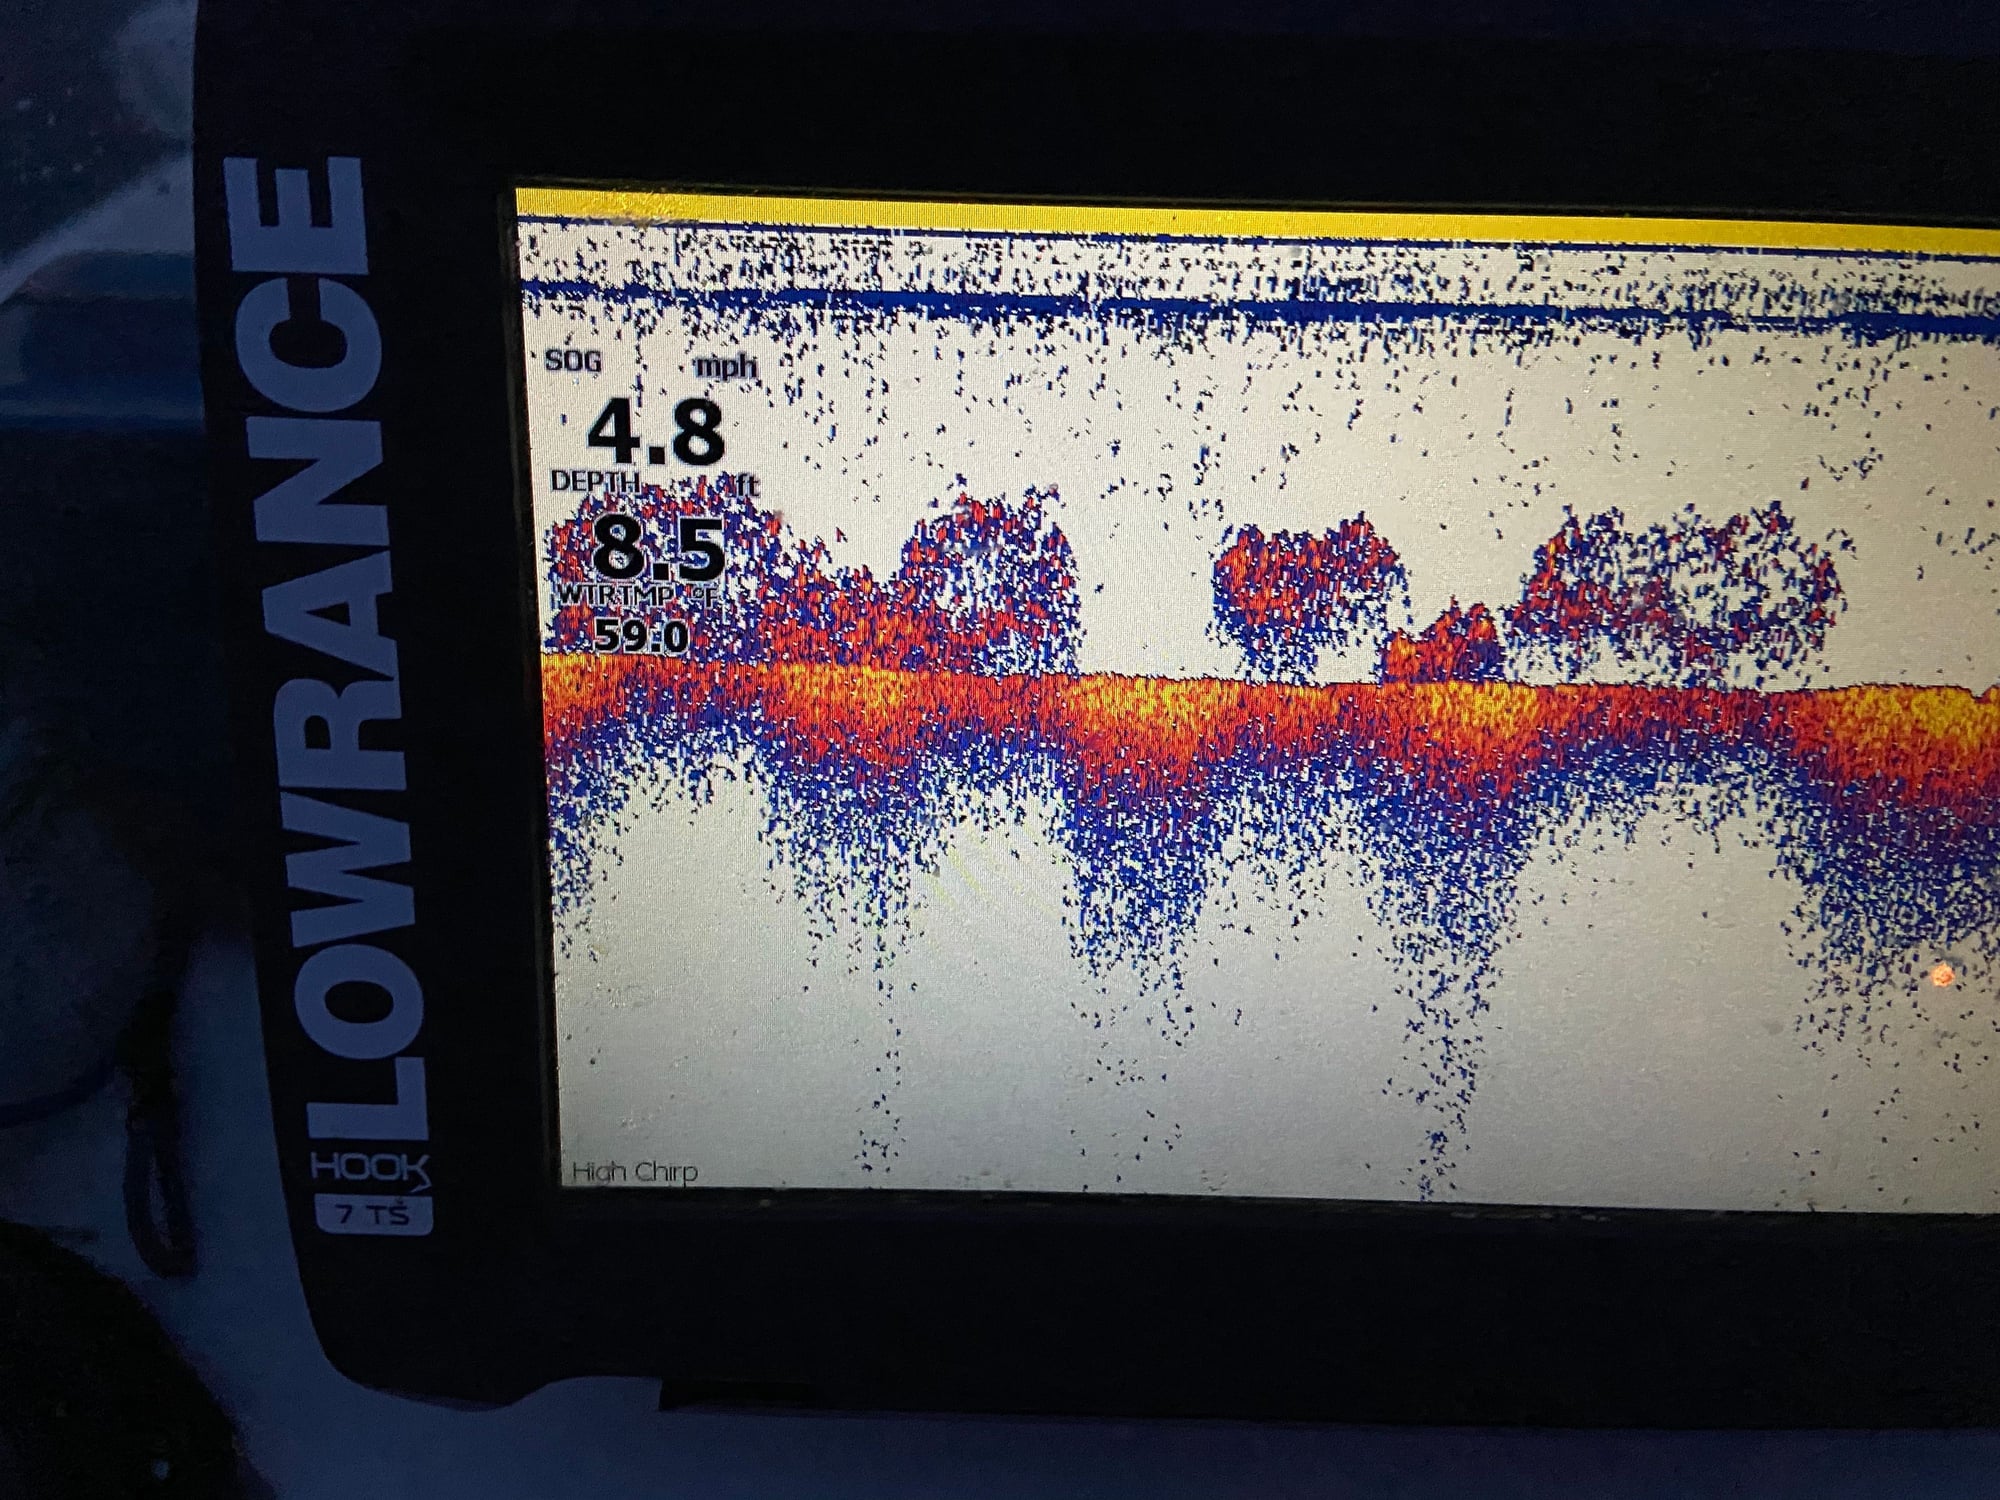 I cannot work out why my GPS screen on my new Lowrance Hook 7